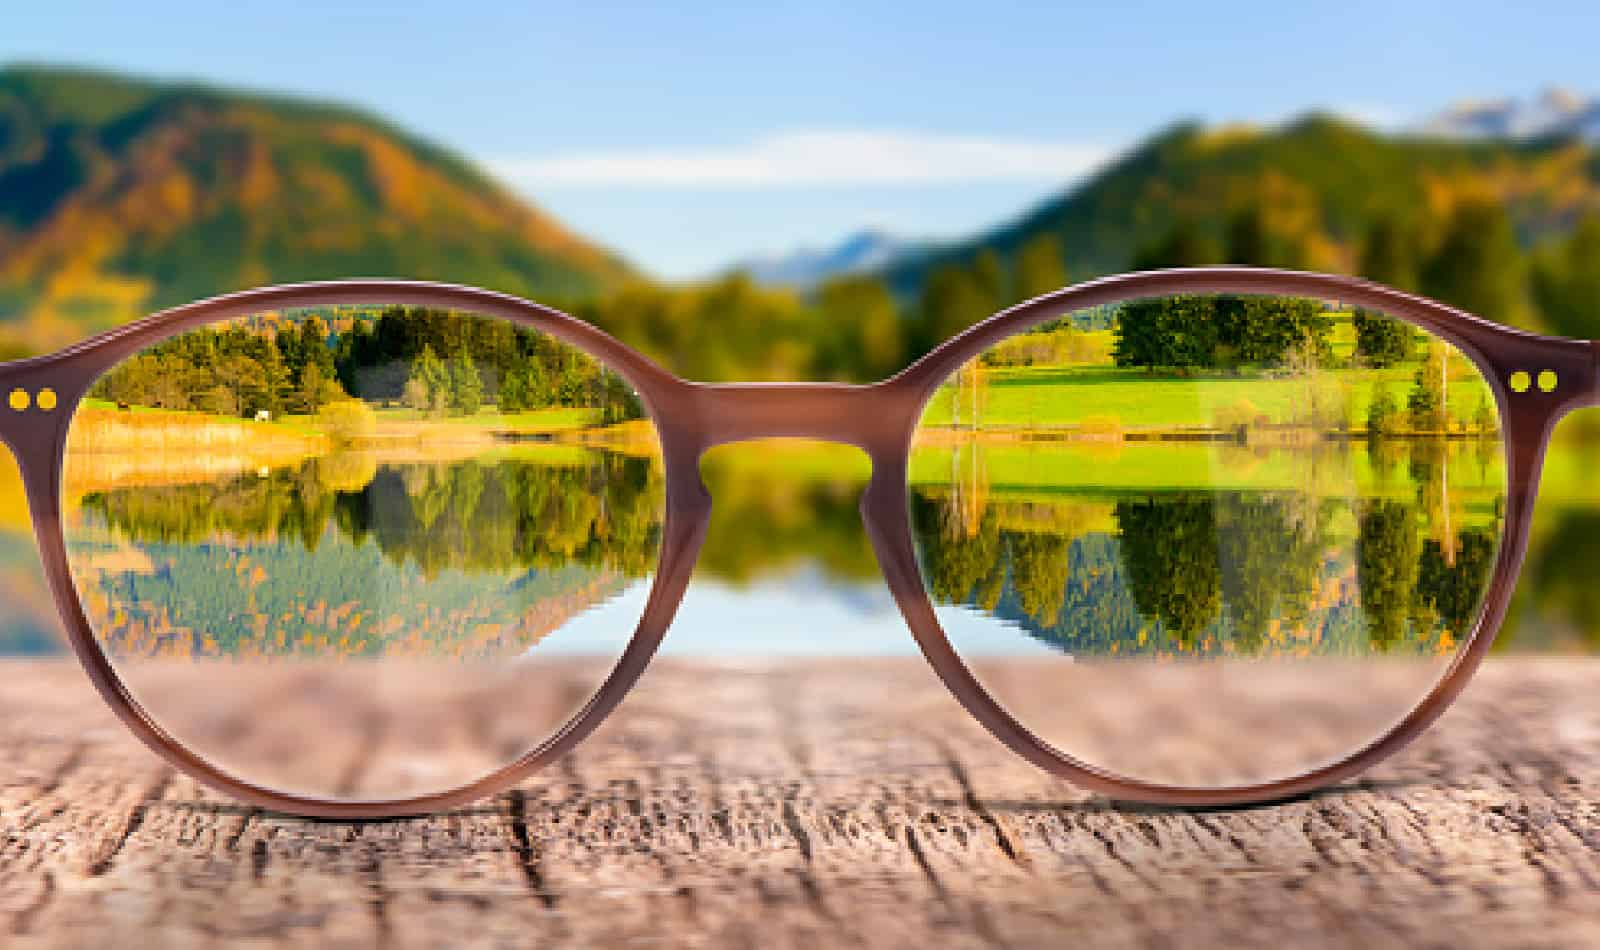 Choosing Eyeglasses That Suit Your Personality and Lifestyle